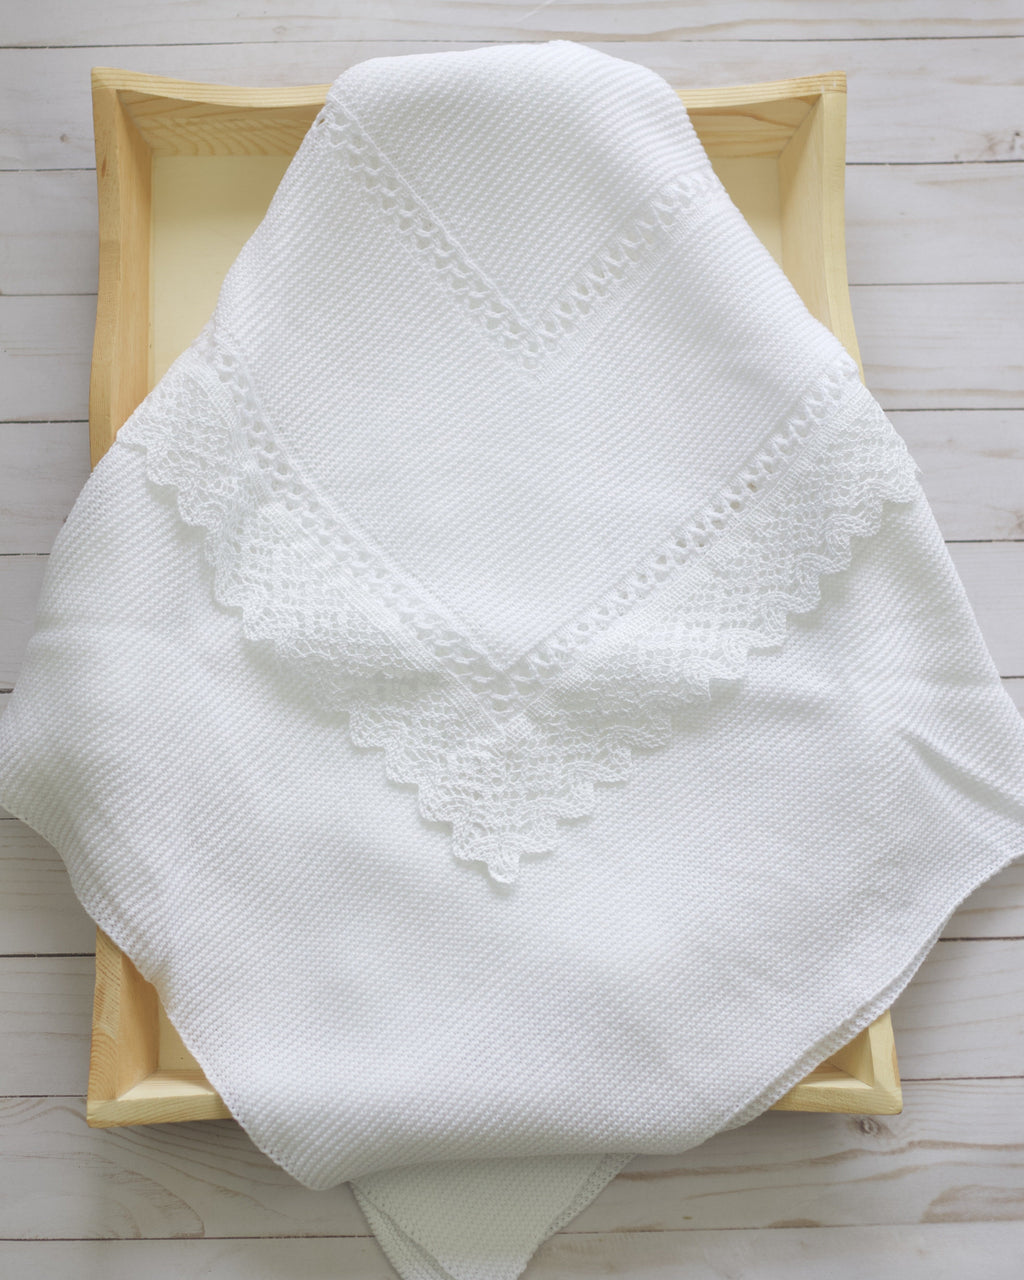 Knitted white blanket for newborn baby girls and boys. Made in Spain